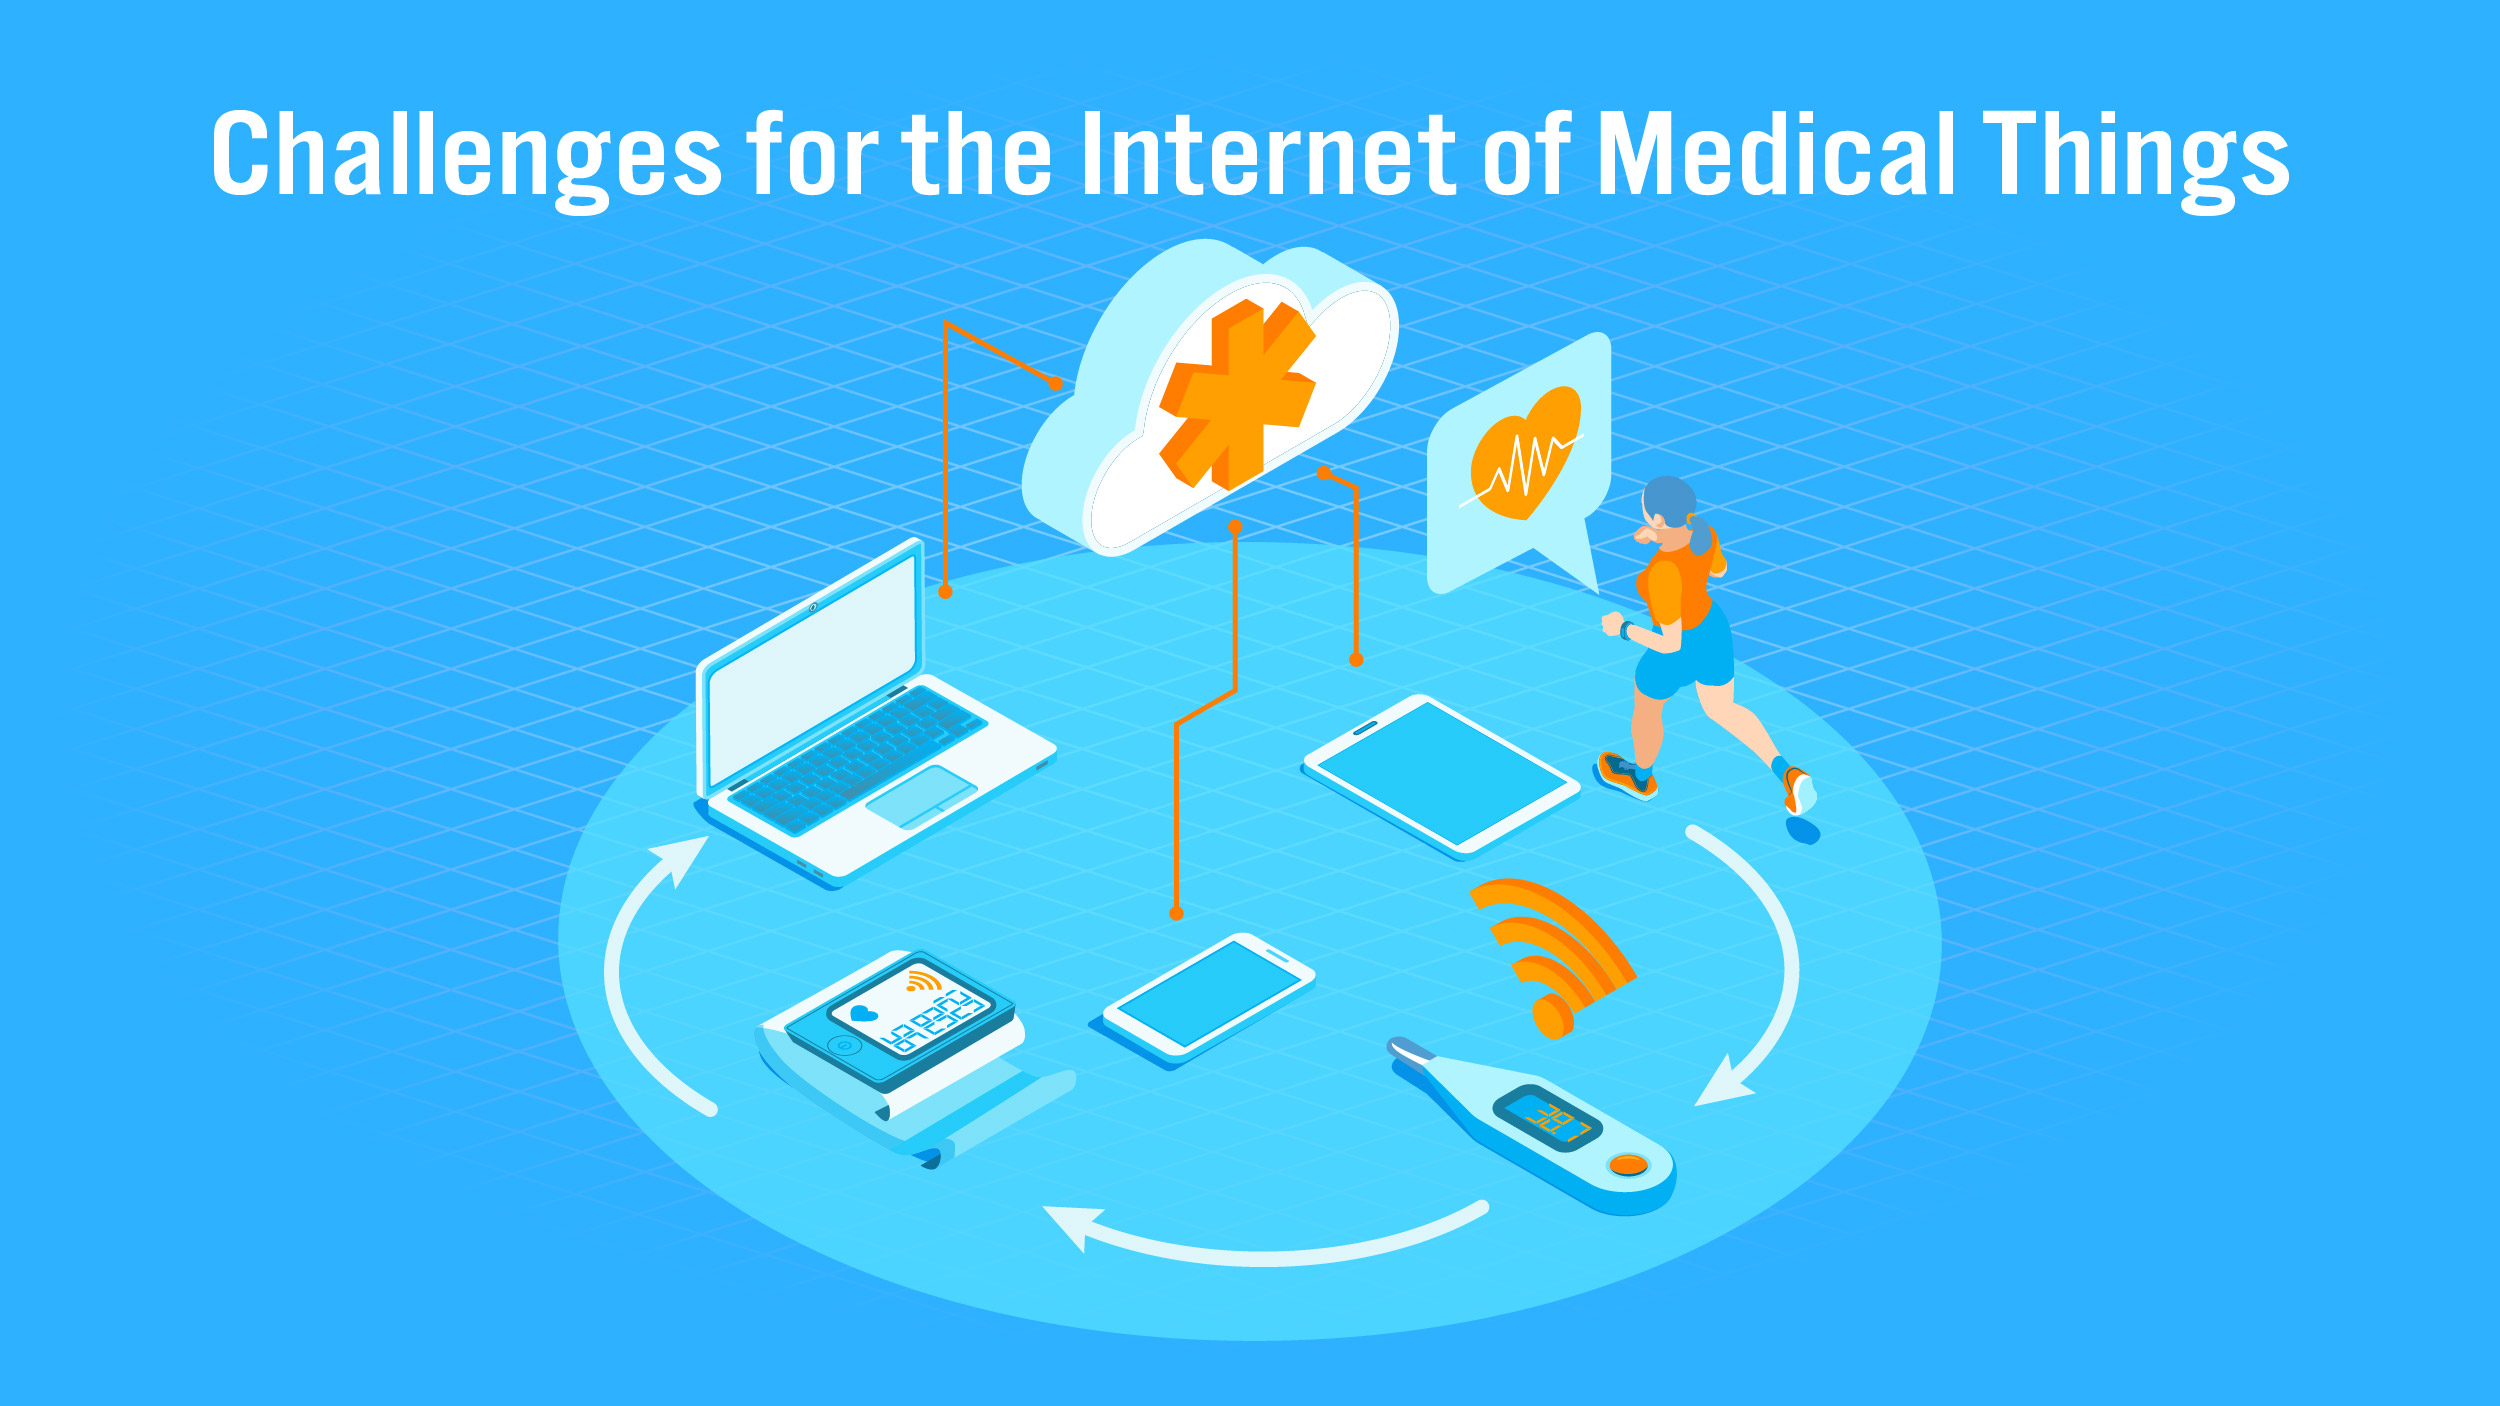 The Internet of Medical Things (IoMT) 